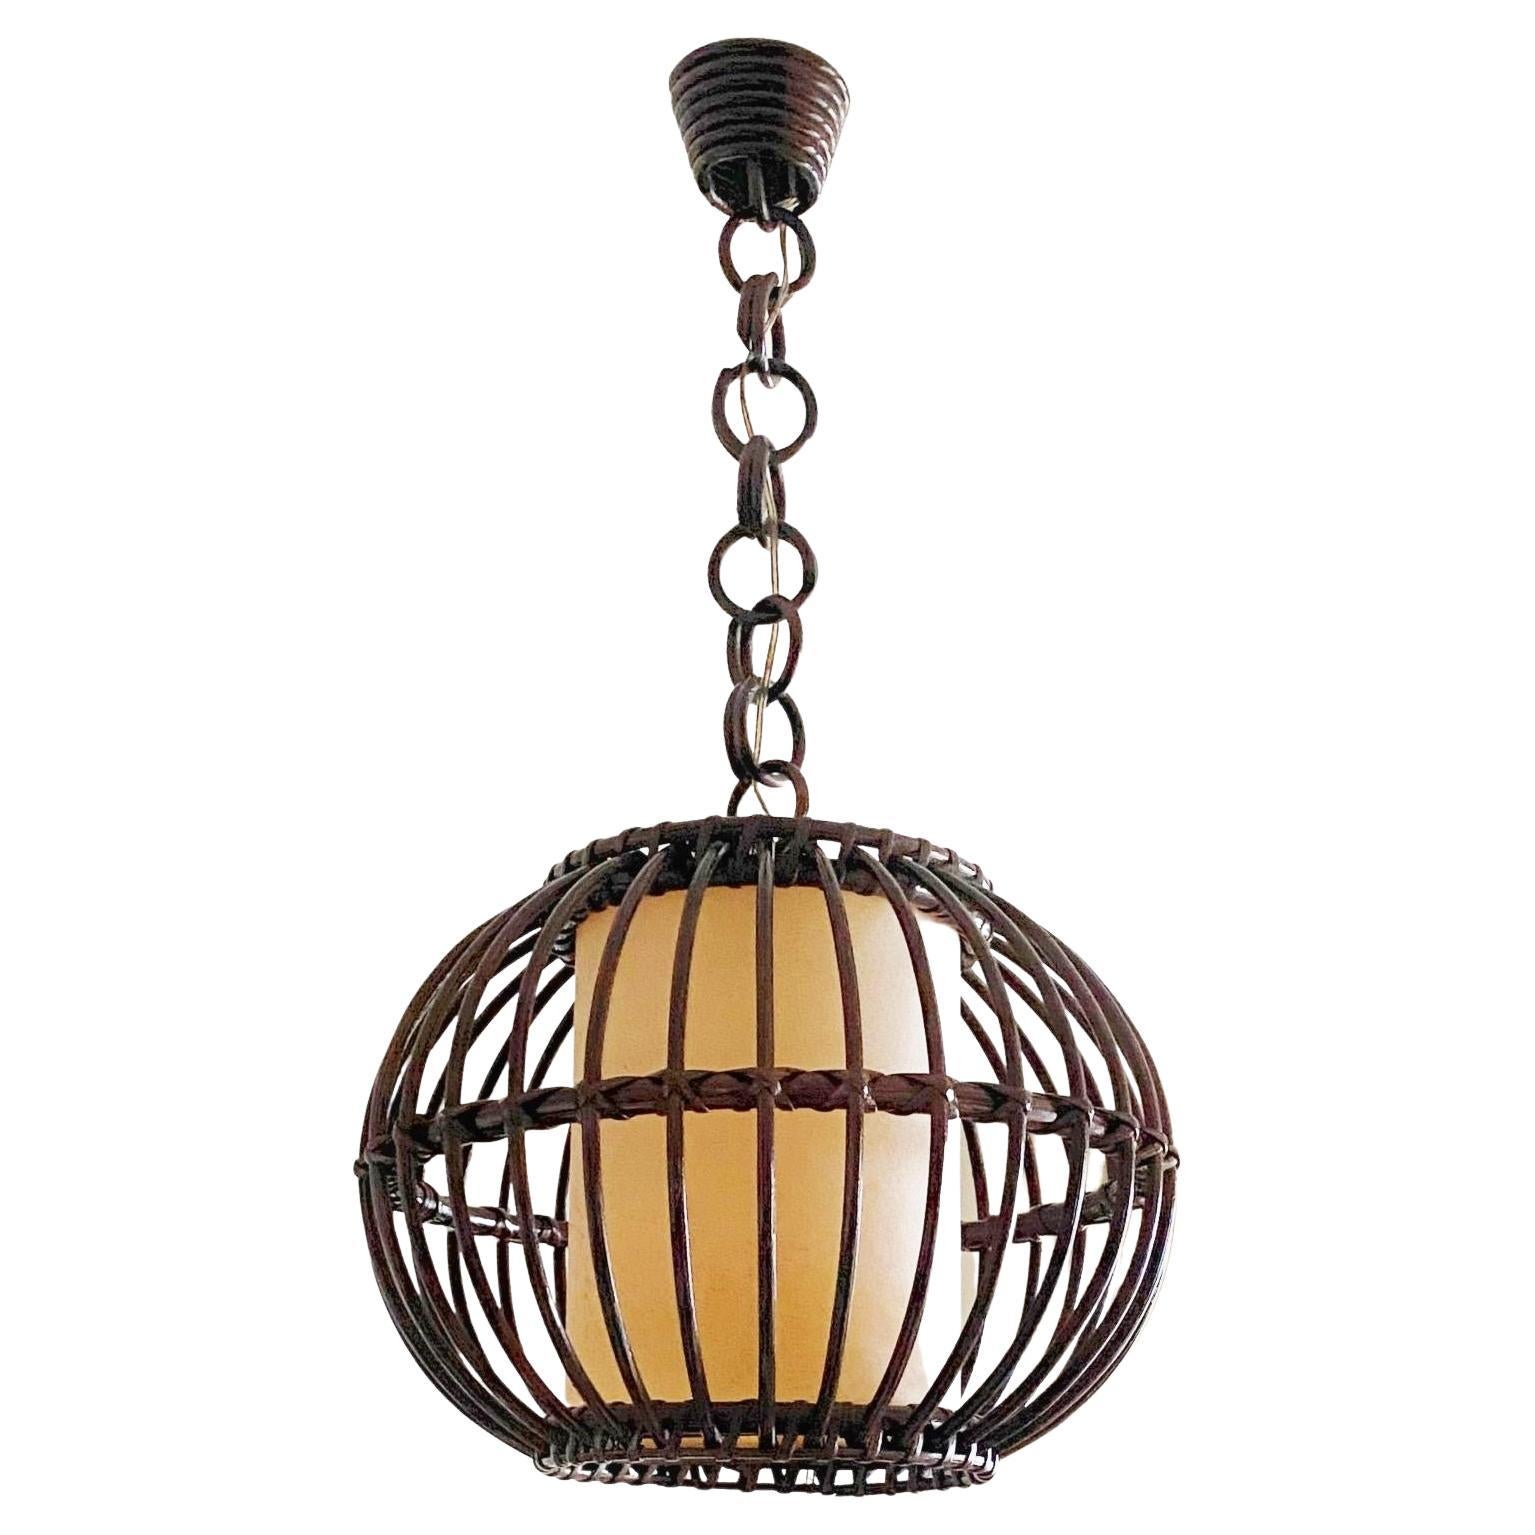 Handcrafted Rattan Wicker Globe Pendant with Perchament Lamp Shade, Spain, 1950s For Sale